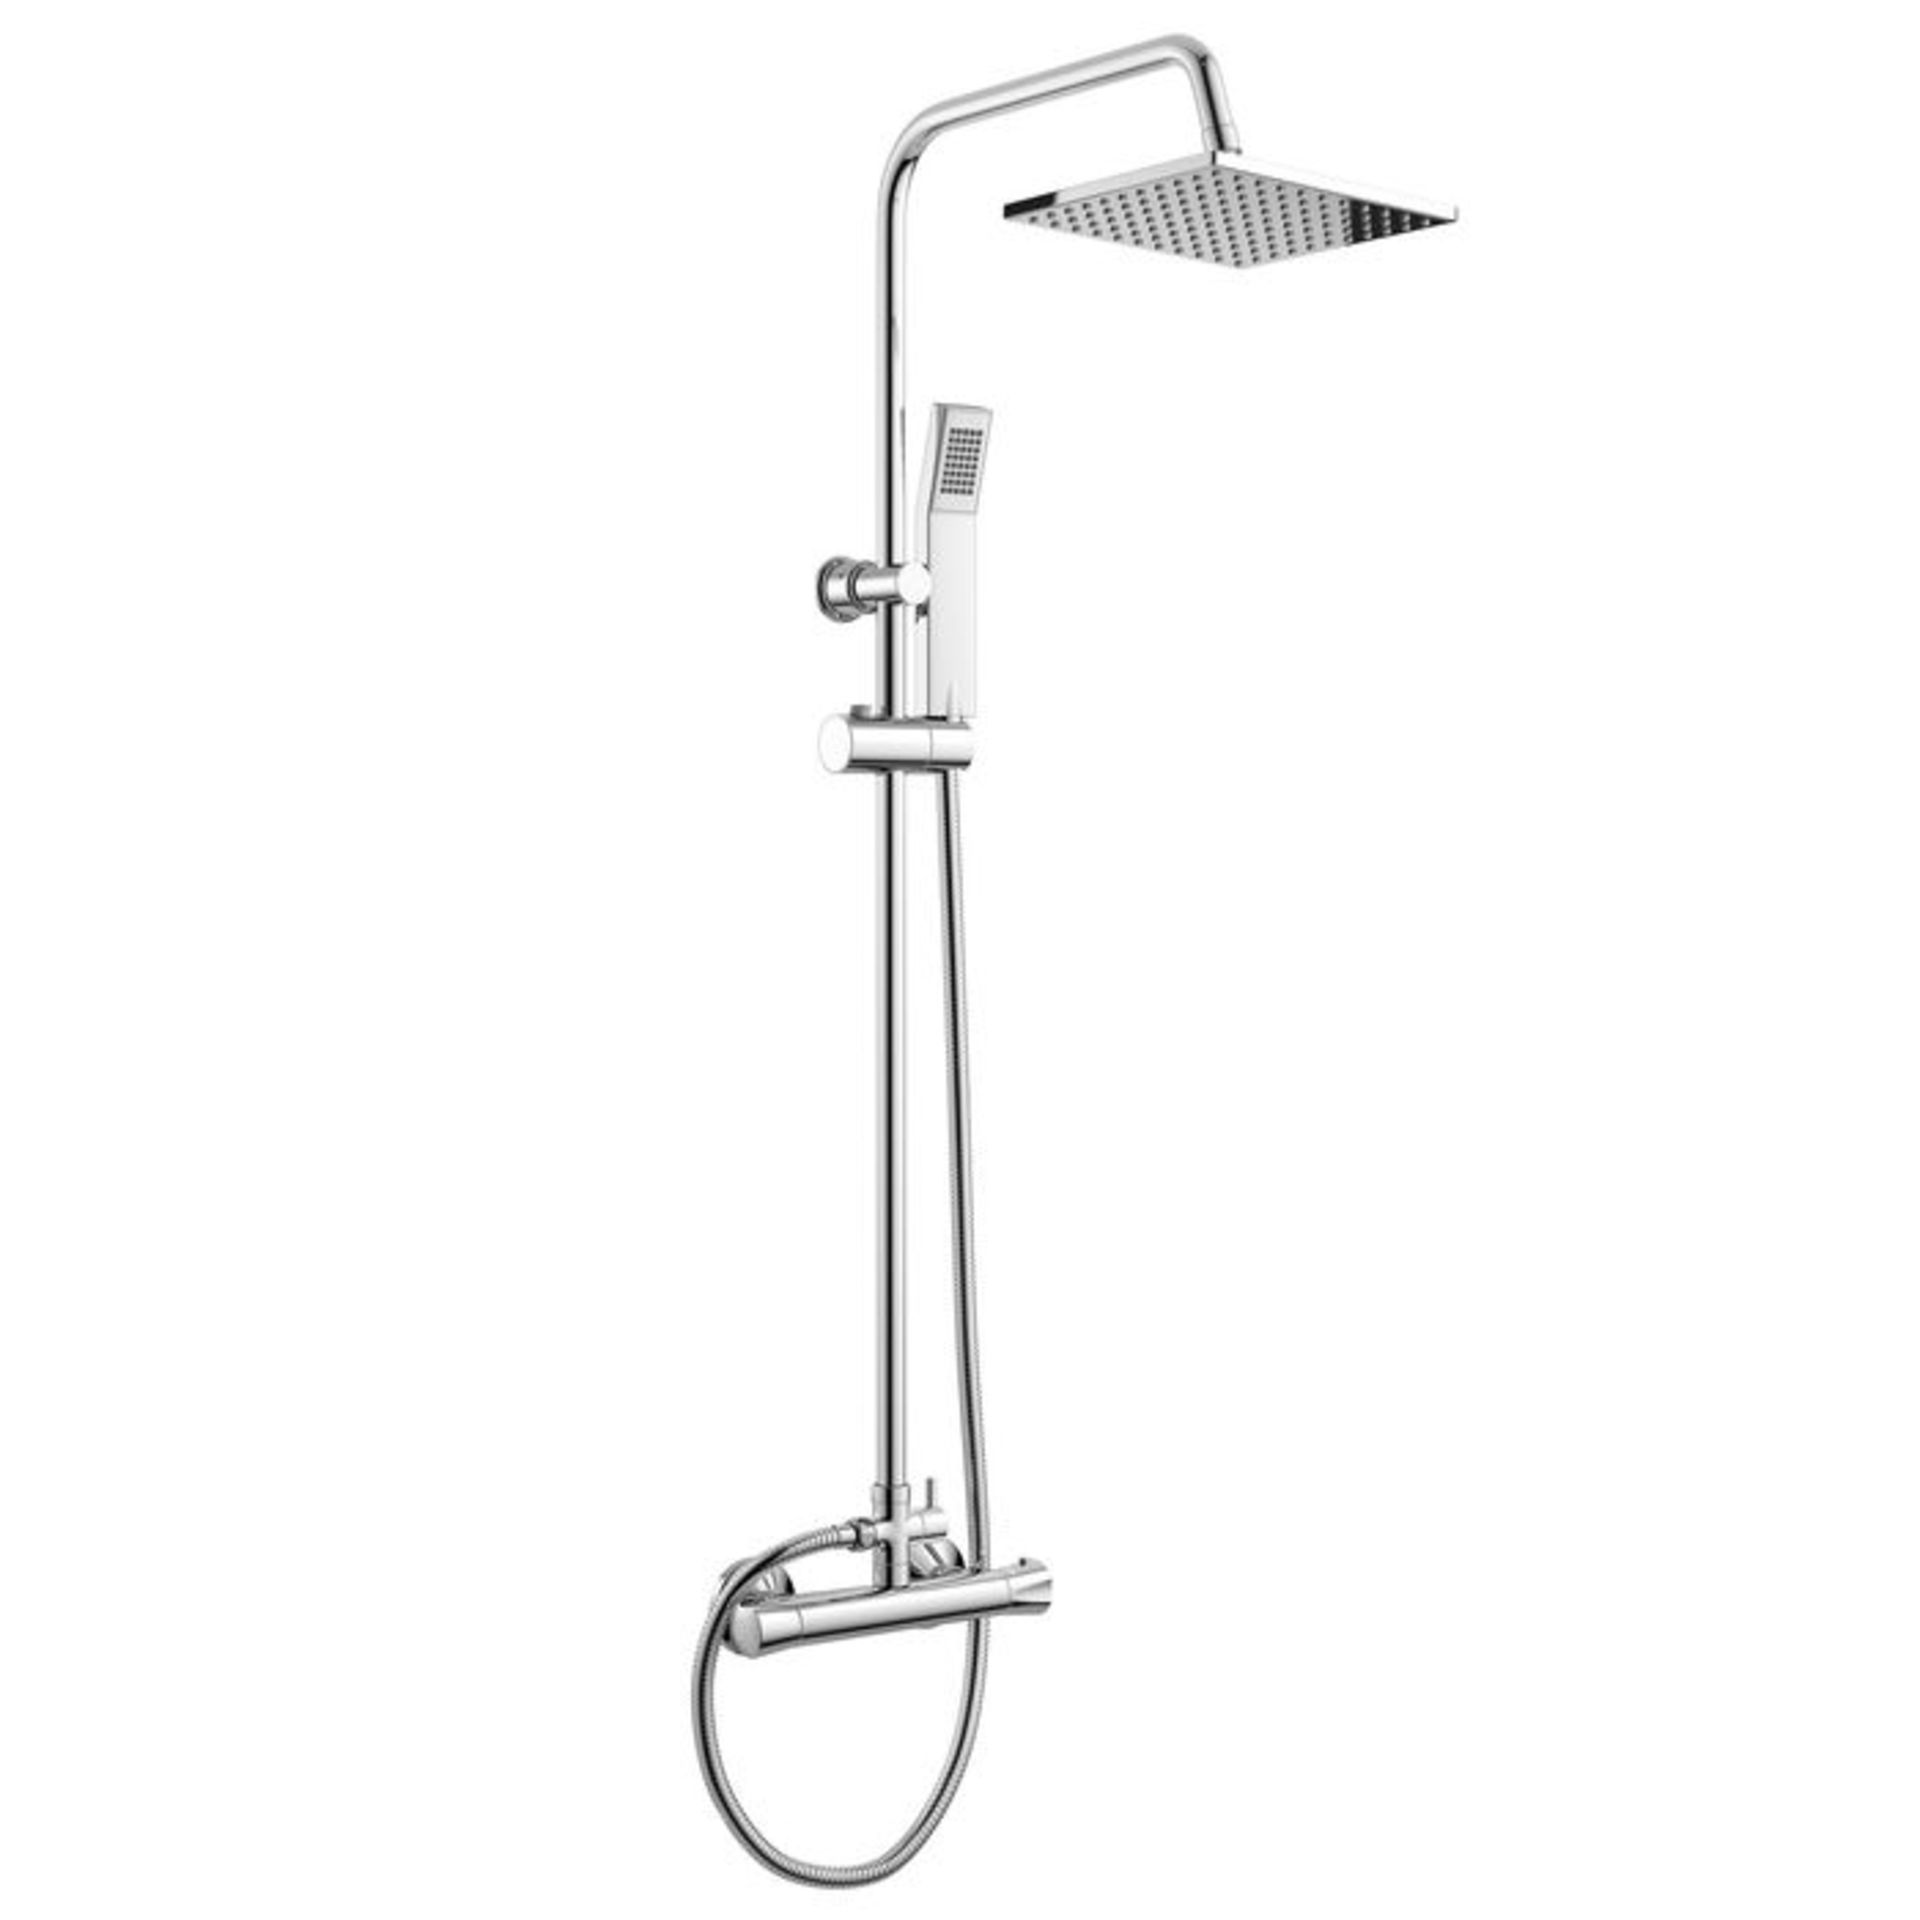 (E62) 200mm Square Head Thermostatic Exposed Shower Kit Hand Held. We love this because it provides